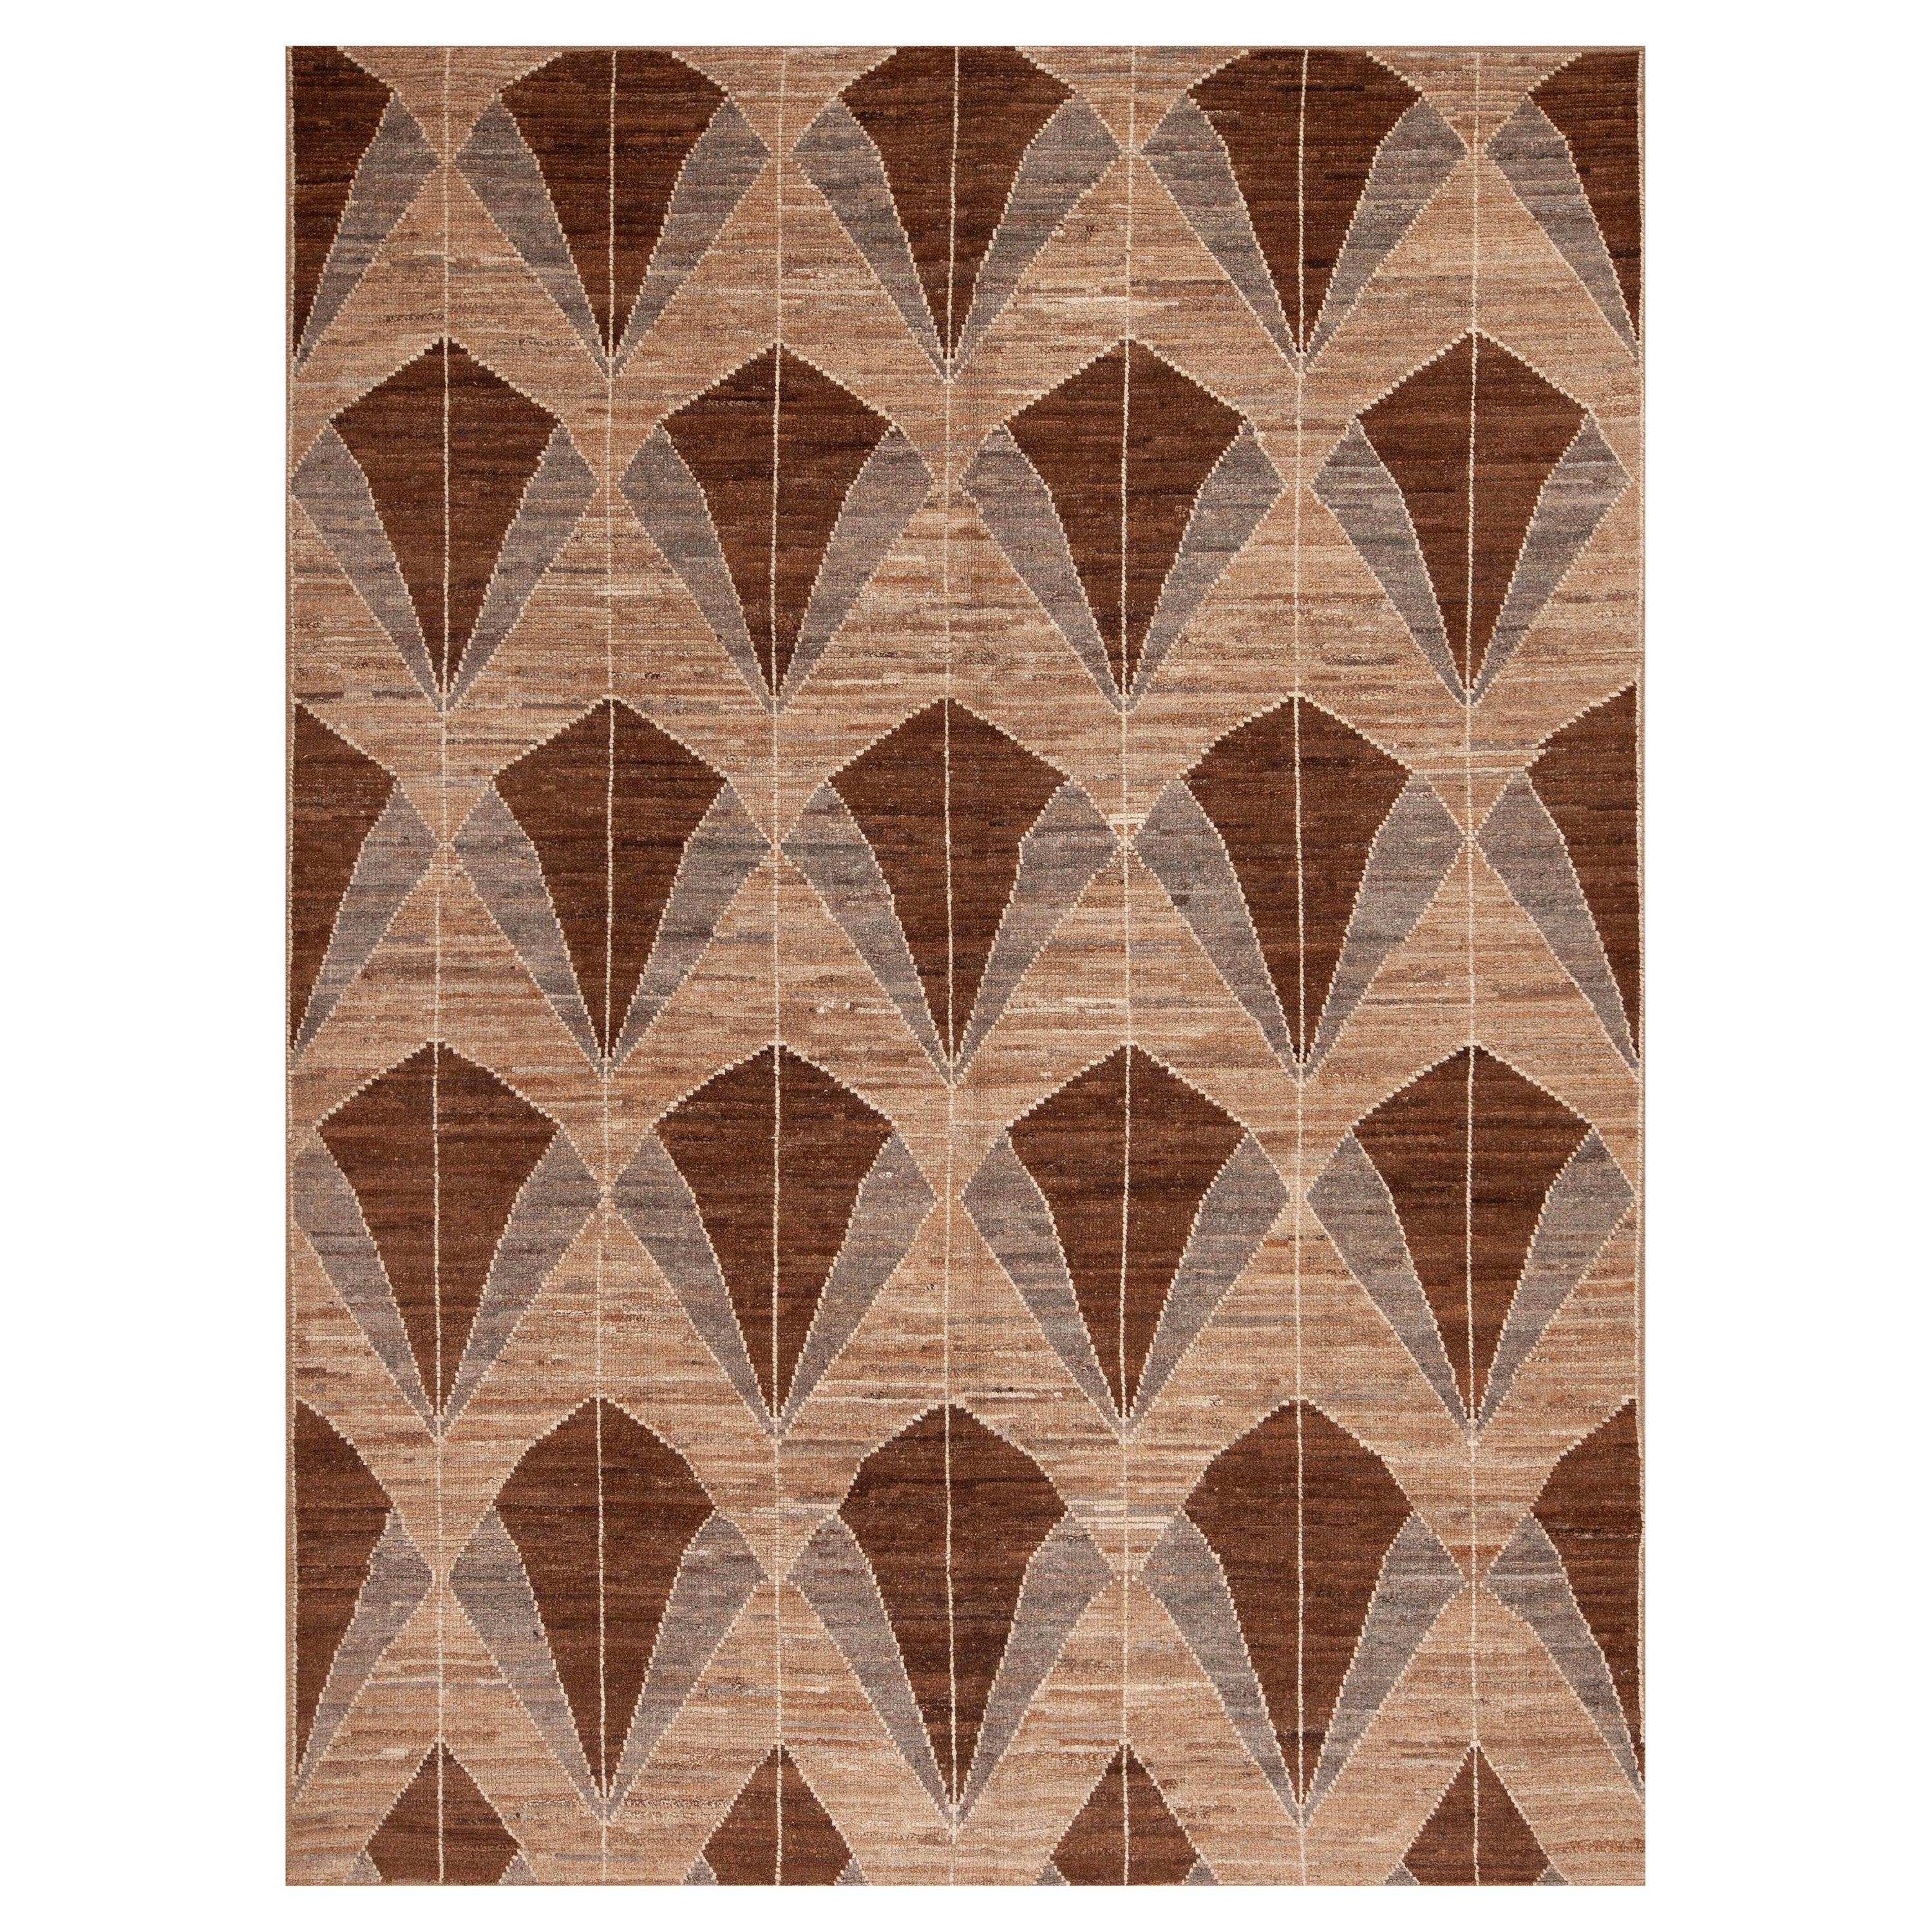 Nazmiyal Collection Artistic Brown and Grey Geometric Modern 6'7" x 9' For Sale